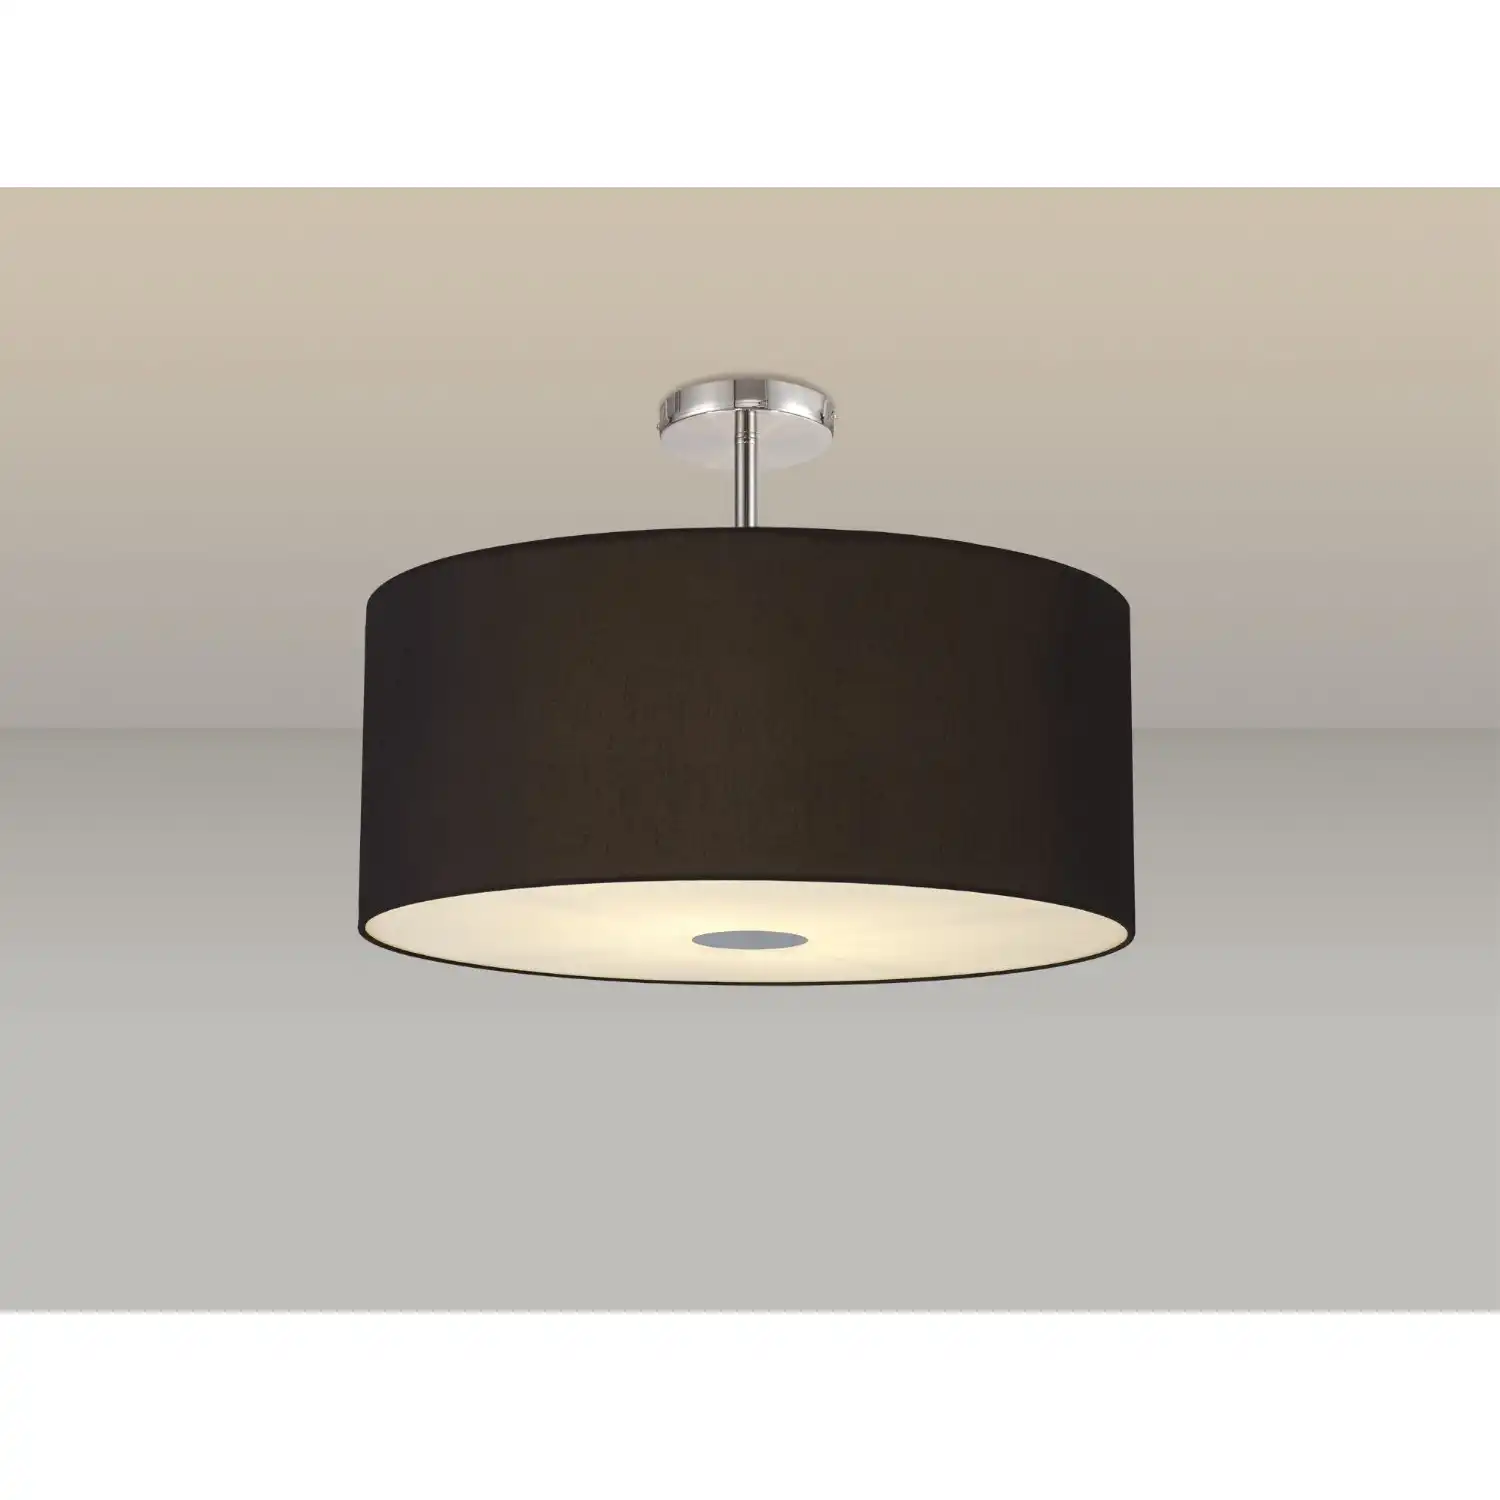 Baymont Polished Chrome 5 Light E27 Drop Flush Ceiling Fixture c w 600 Dual Faux Silk Fabric Shade, Black Green Olive And Frosted PC Acrylic Diffuser